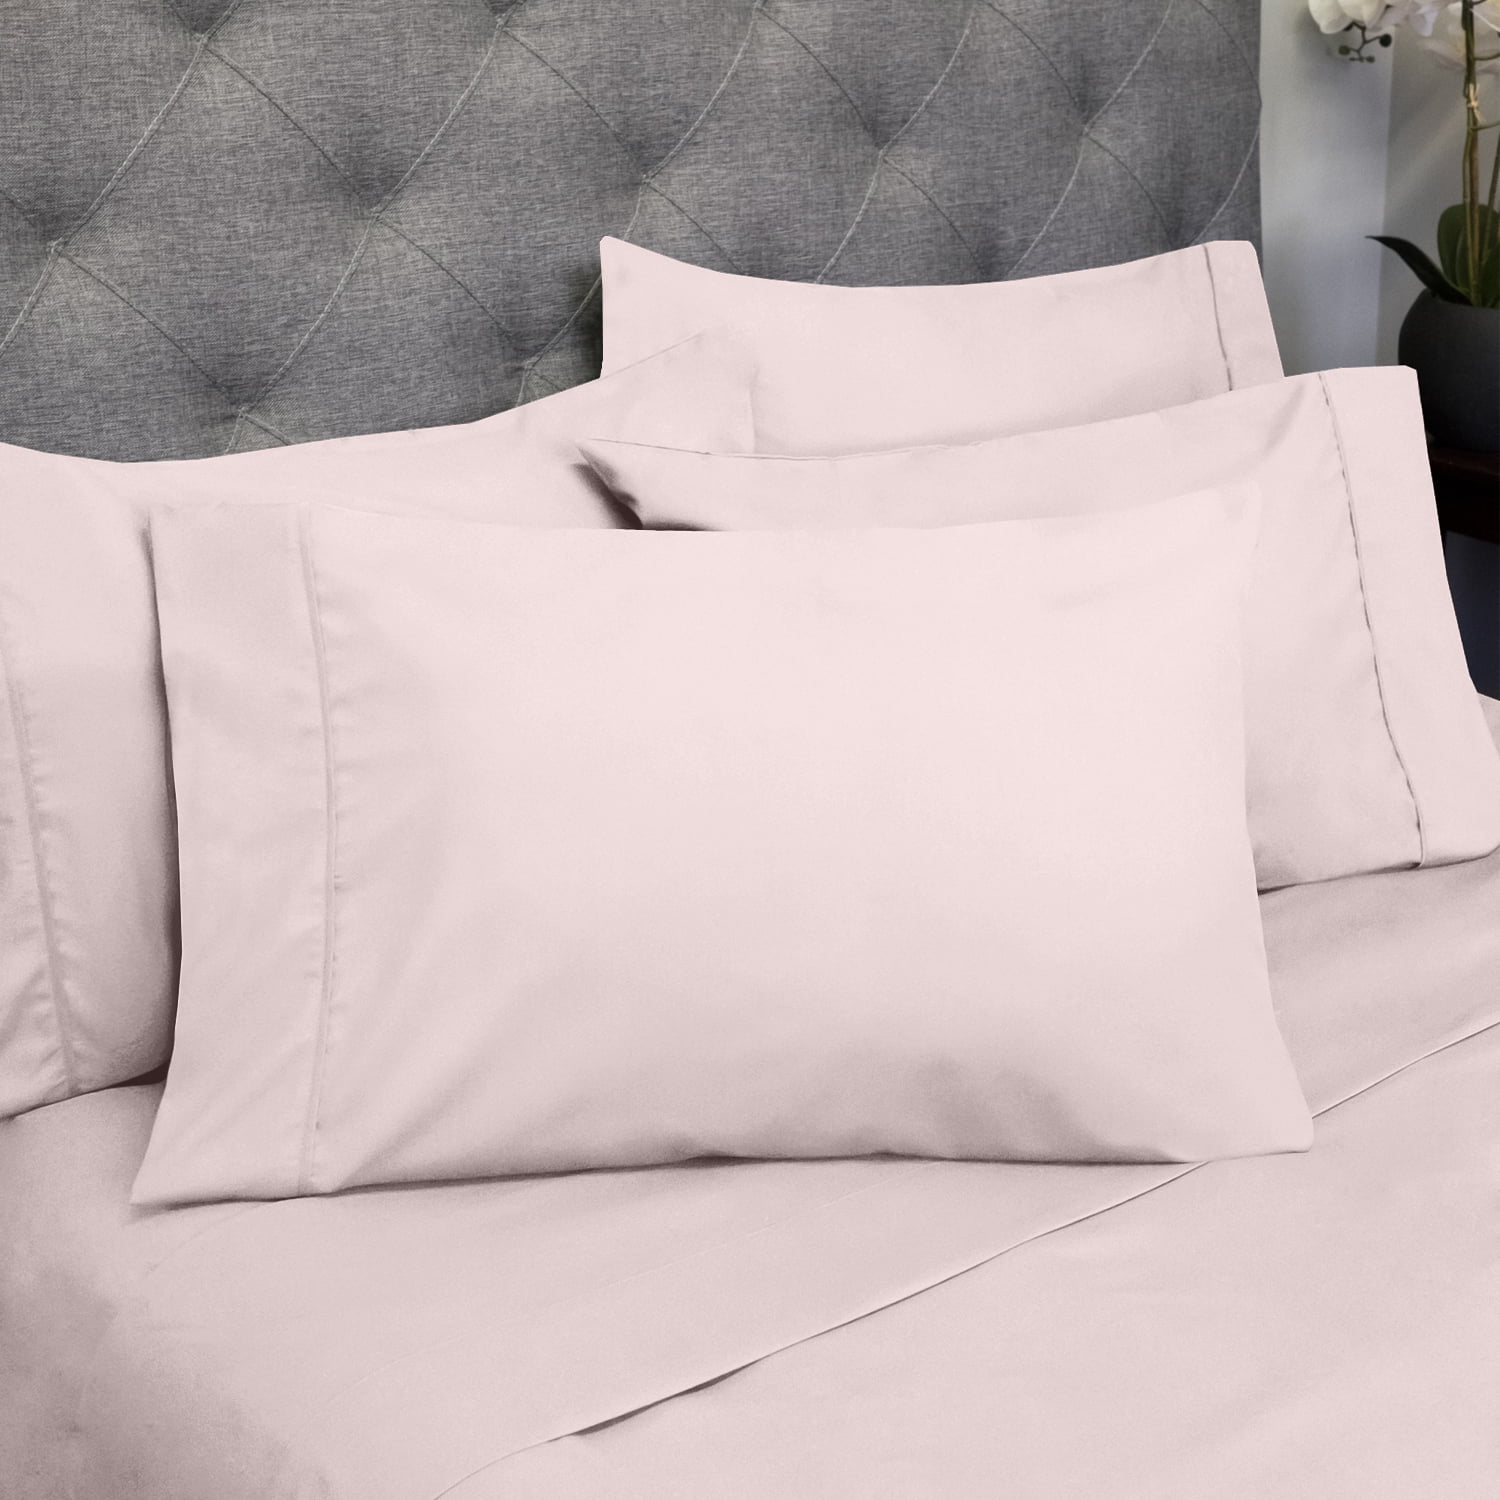 Details about   UK Bedding All Items With All Size 1000 TC Egyptian Cotton Pink Solid 